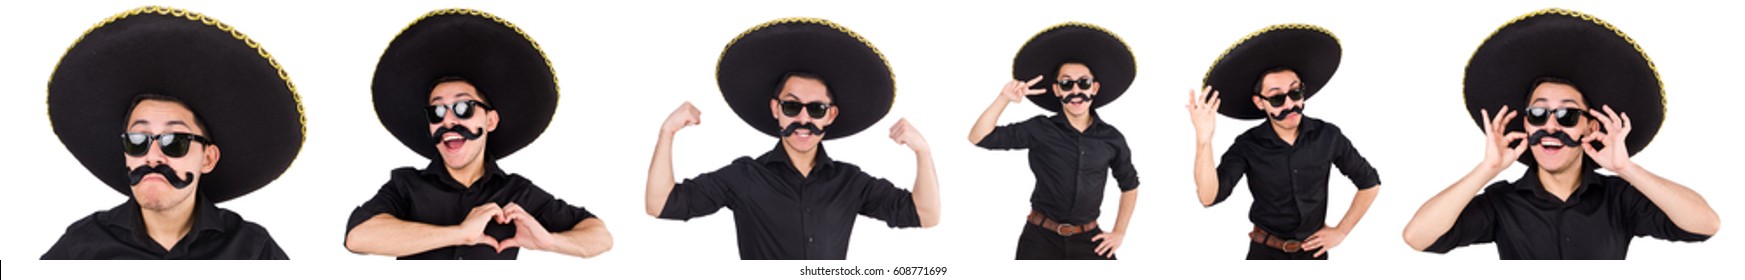 Funny man wearing mexican sombrero hat isolated on white - Shutterstock ID 608771699